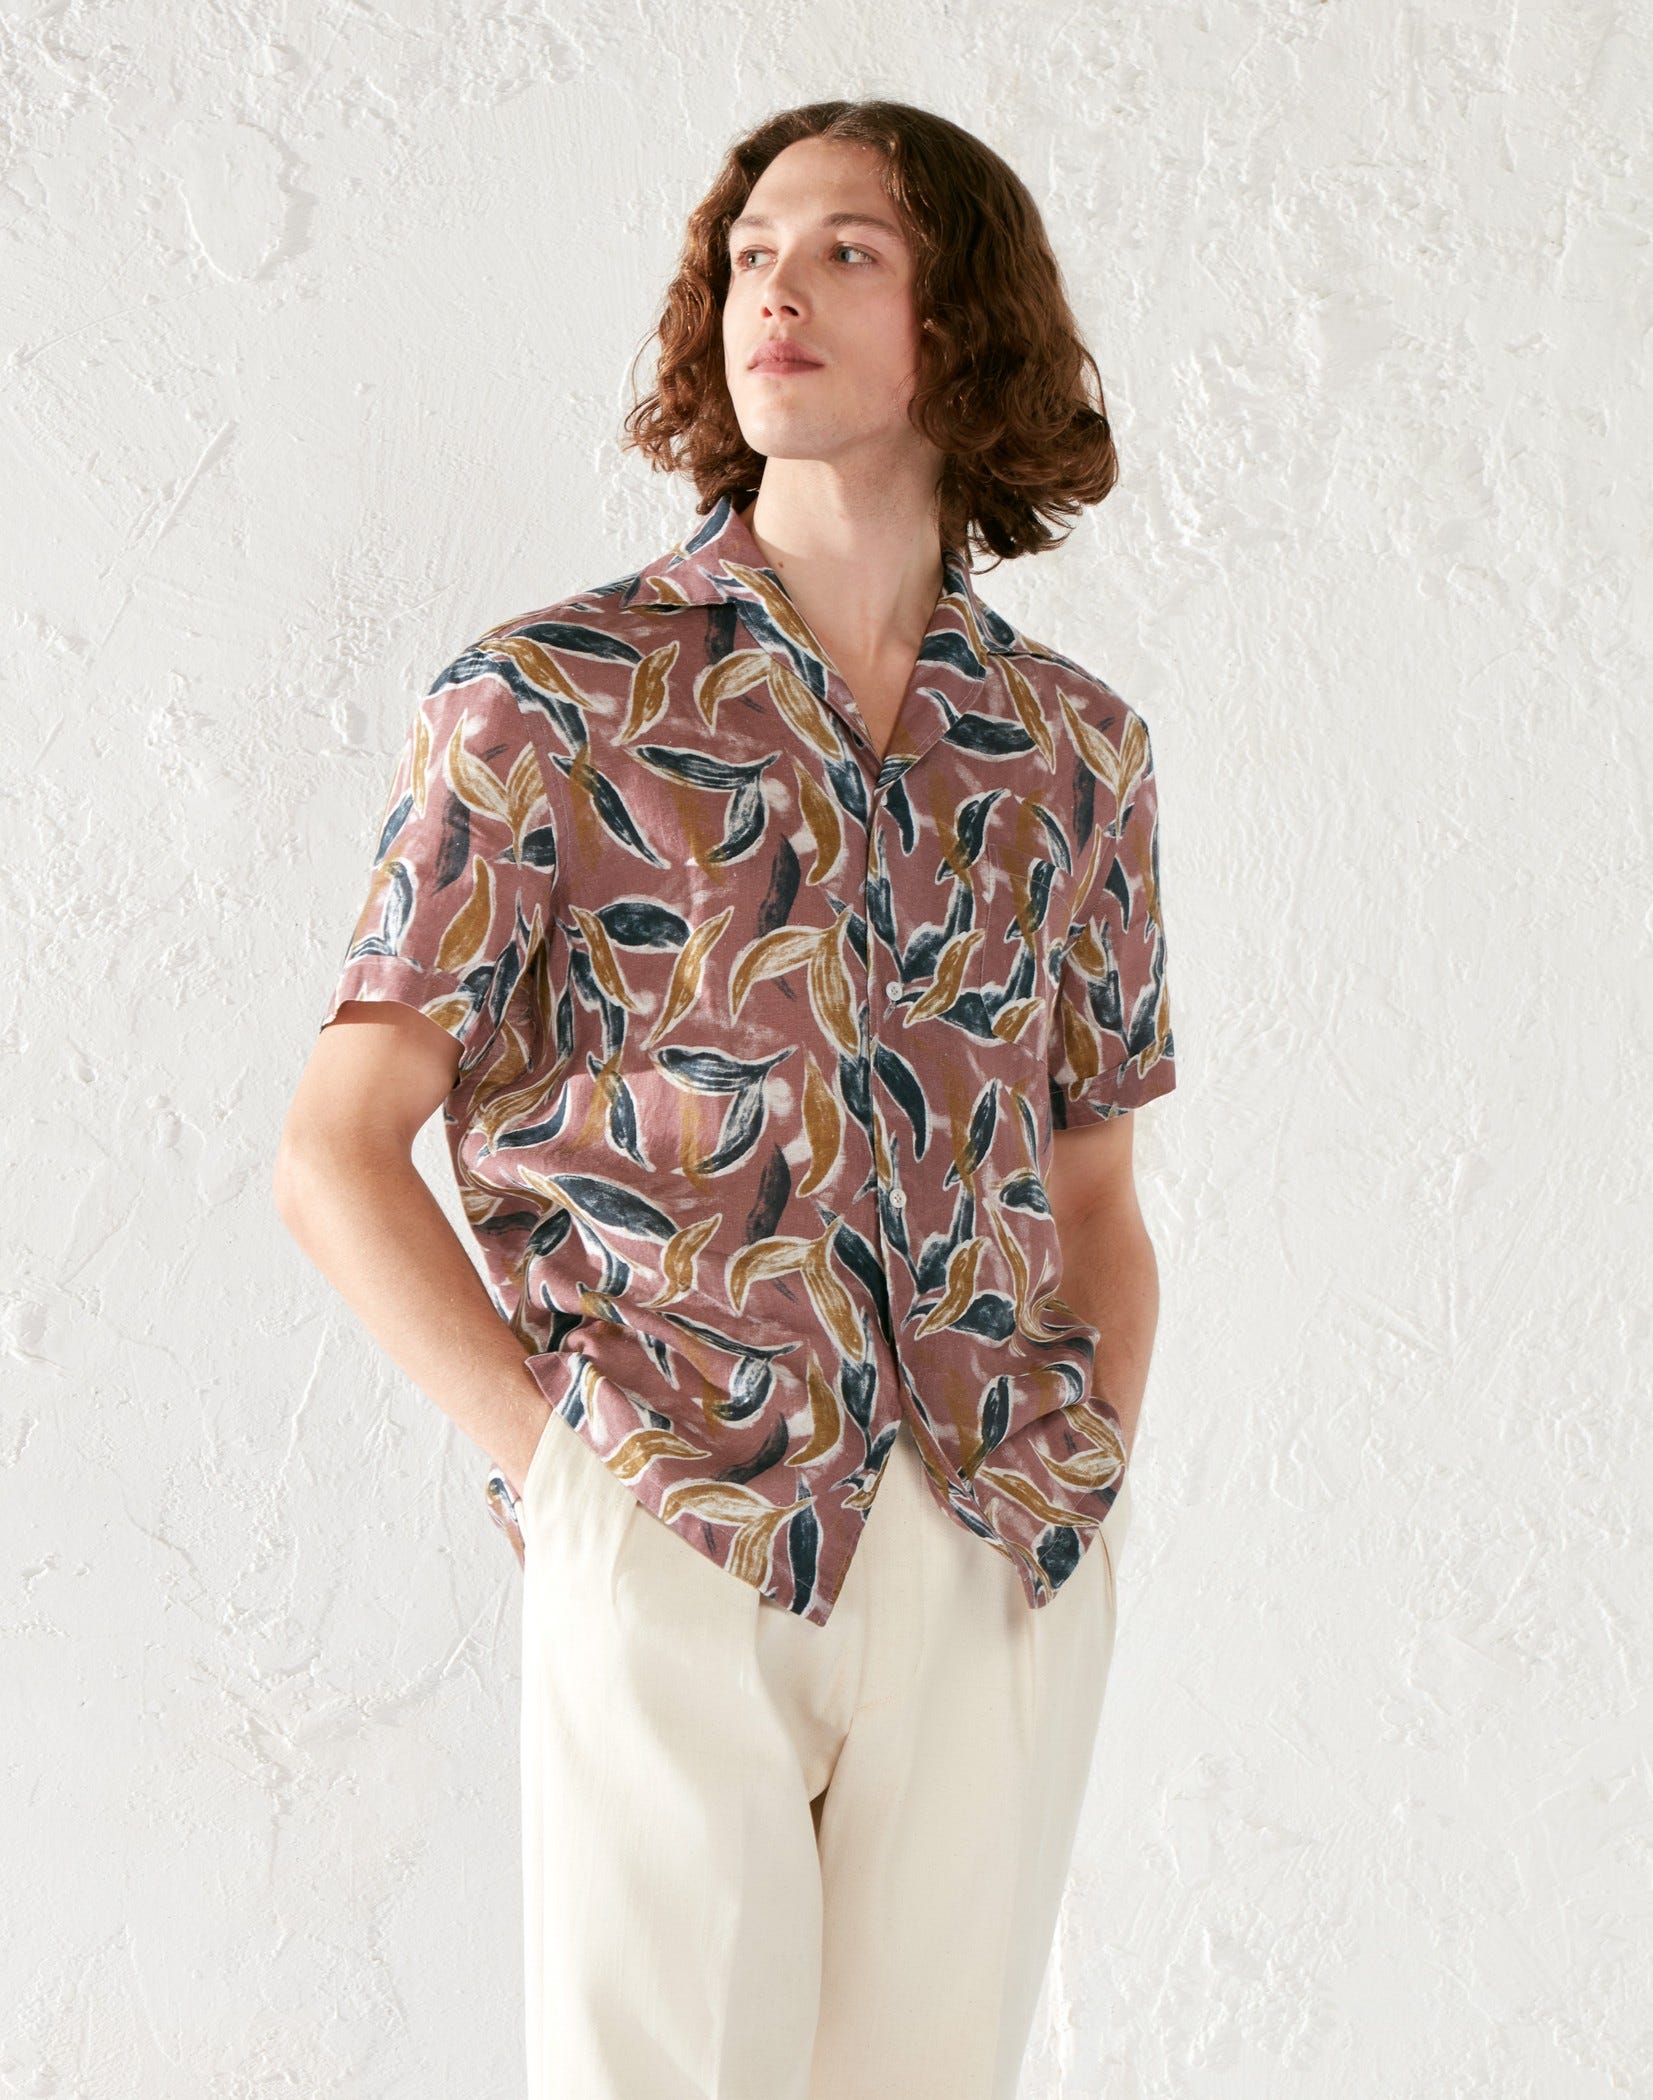 Pink research shirt with leaves print